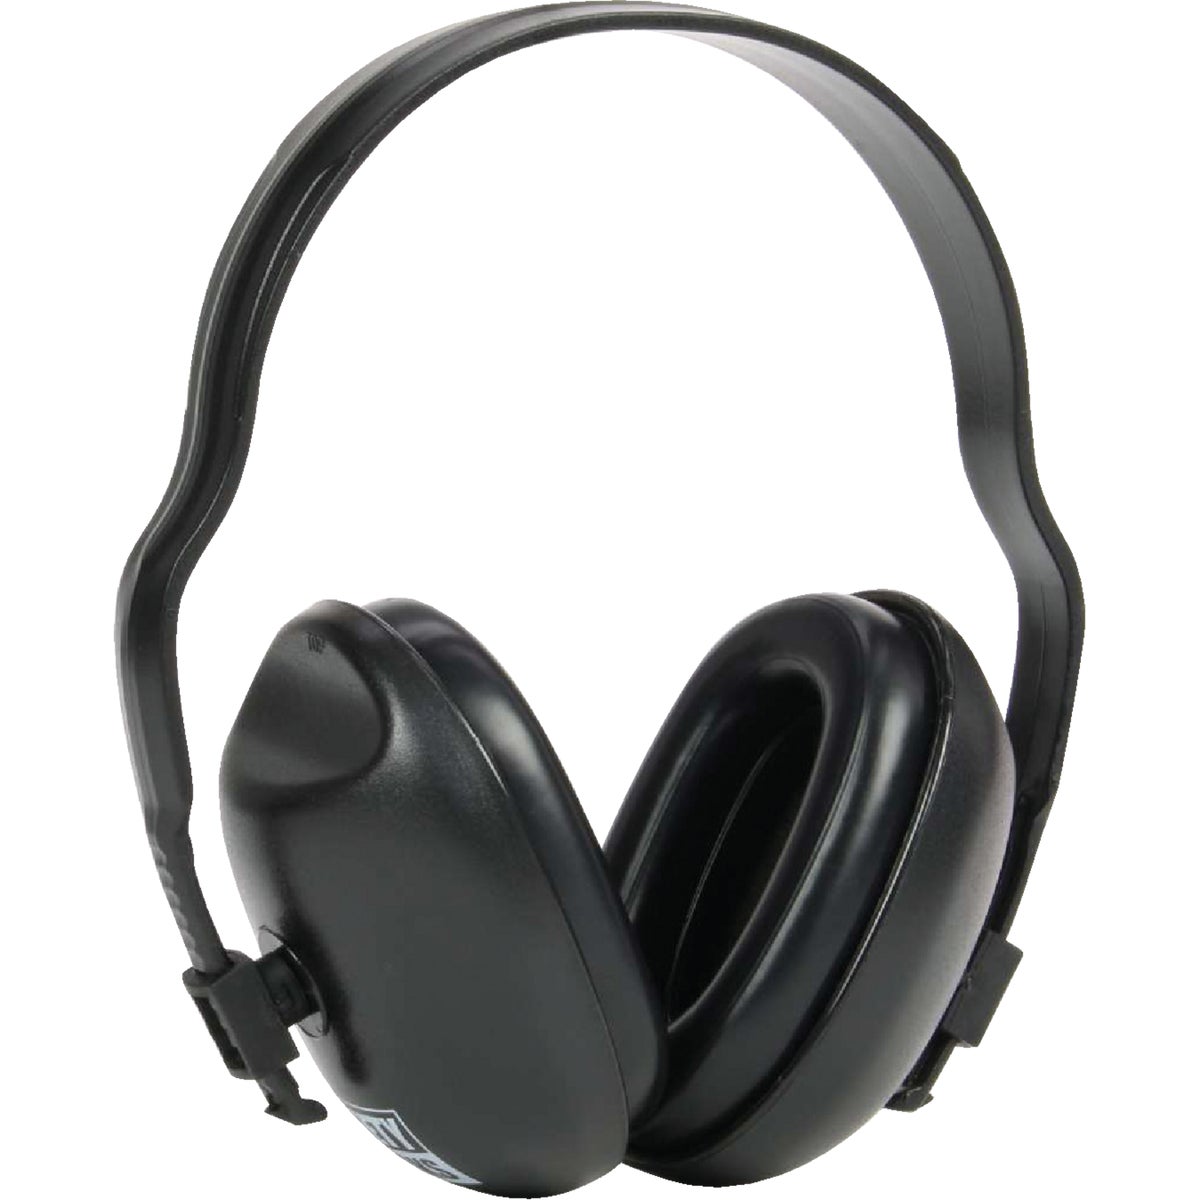 Item 324949, Industrial grade earmuffs featuring single-point attachment in combination 